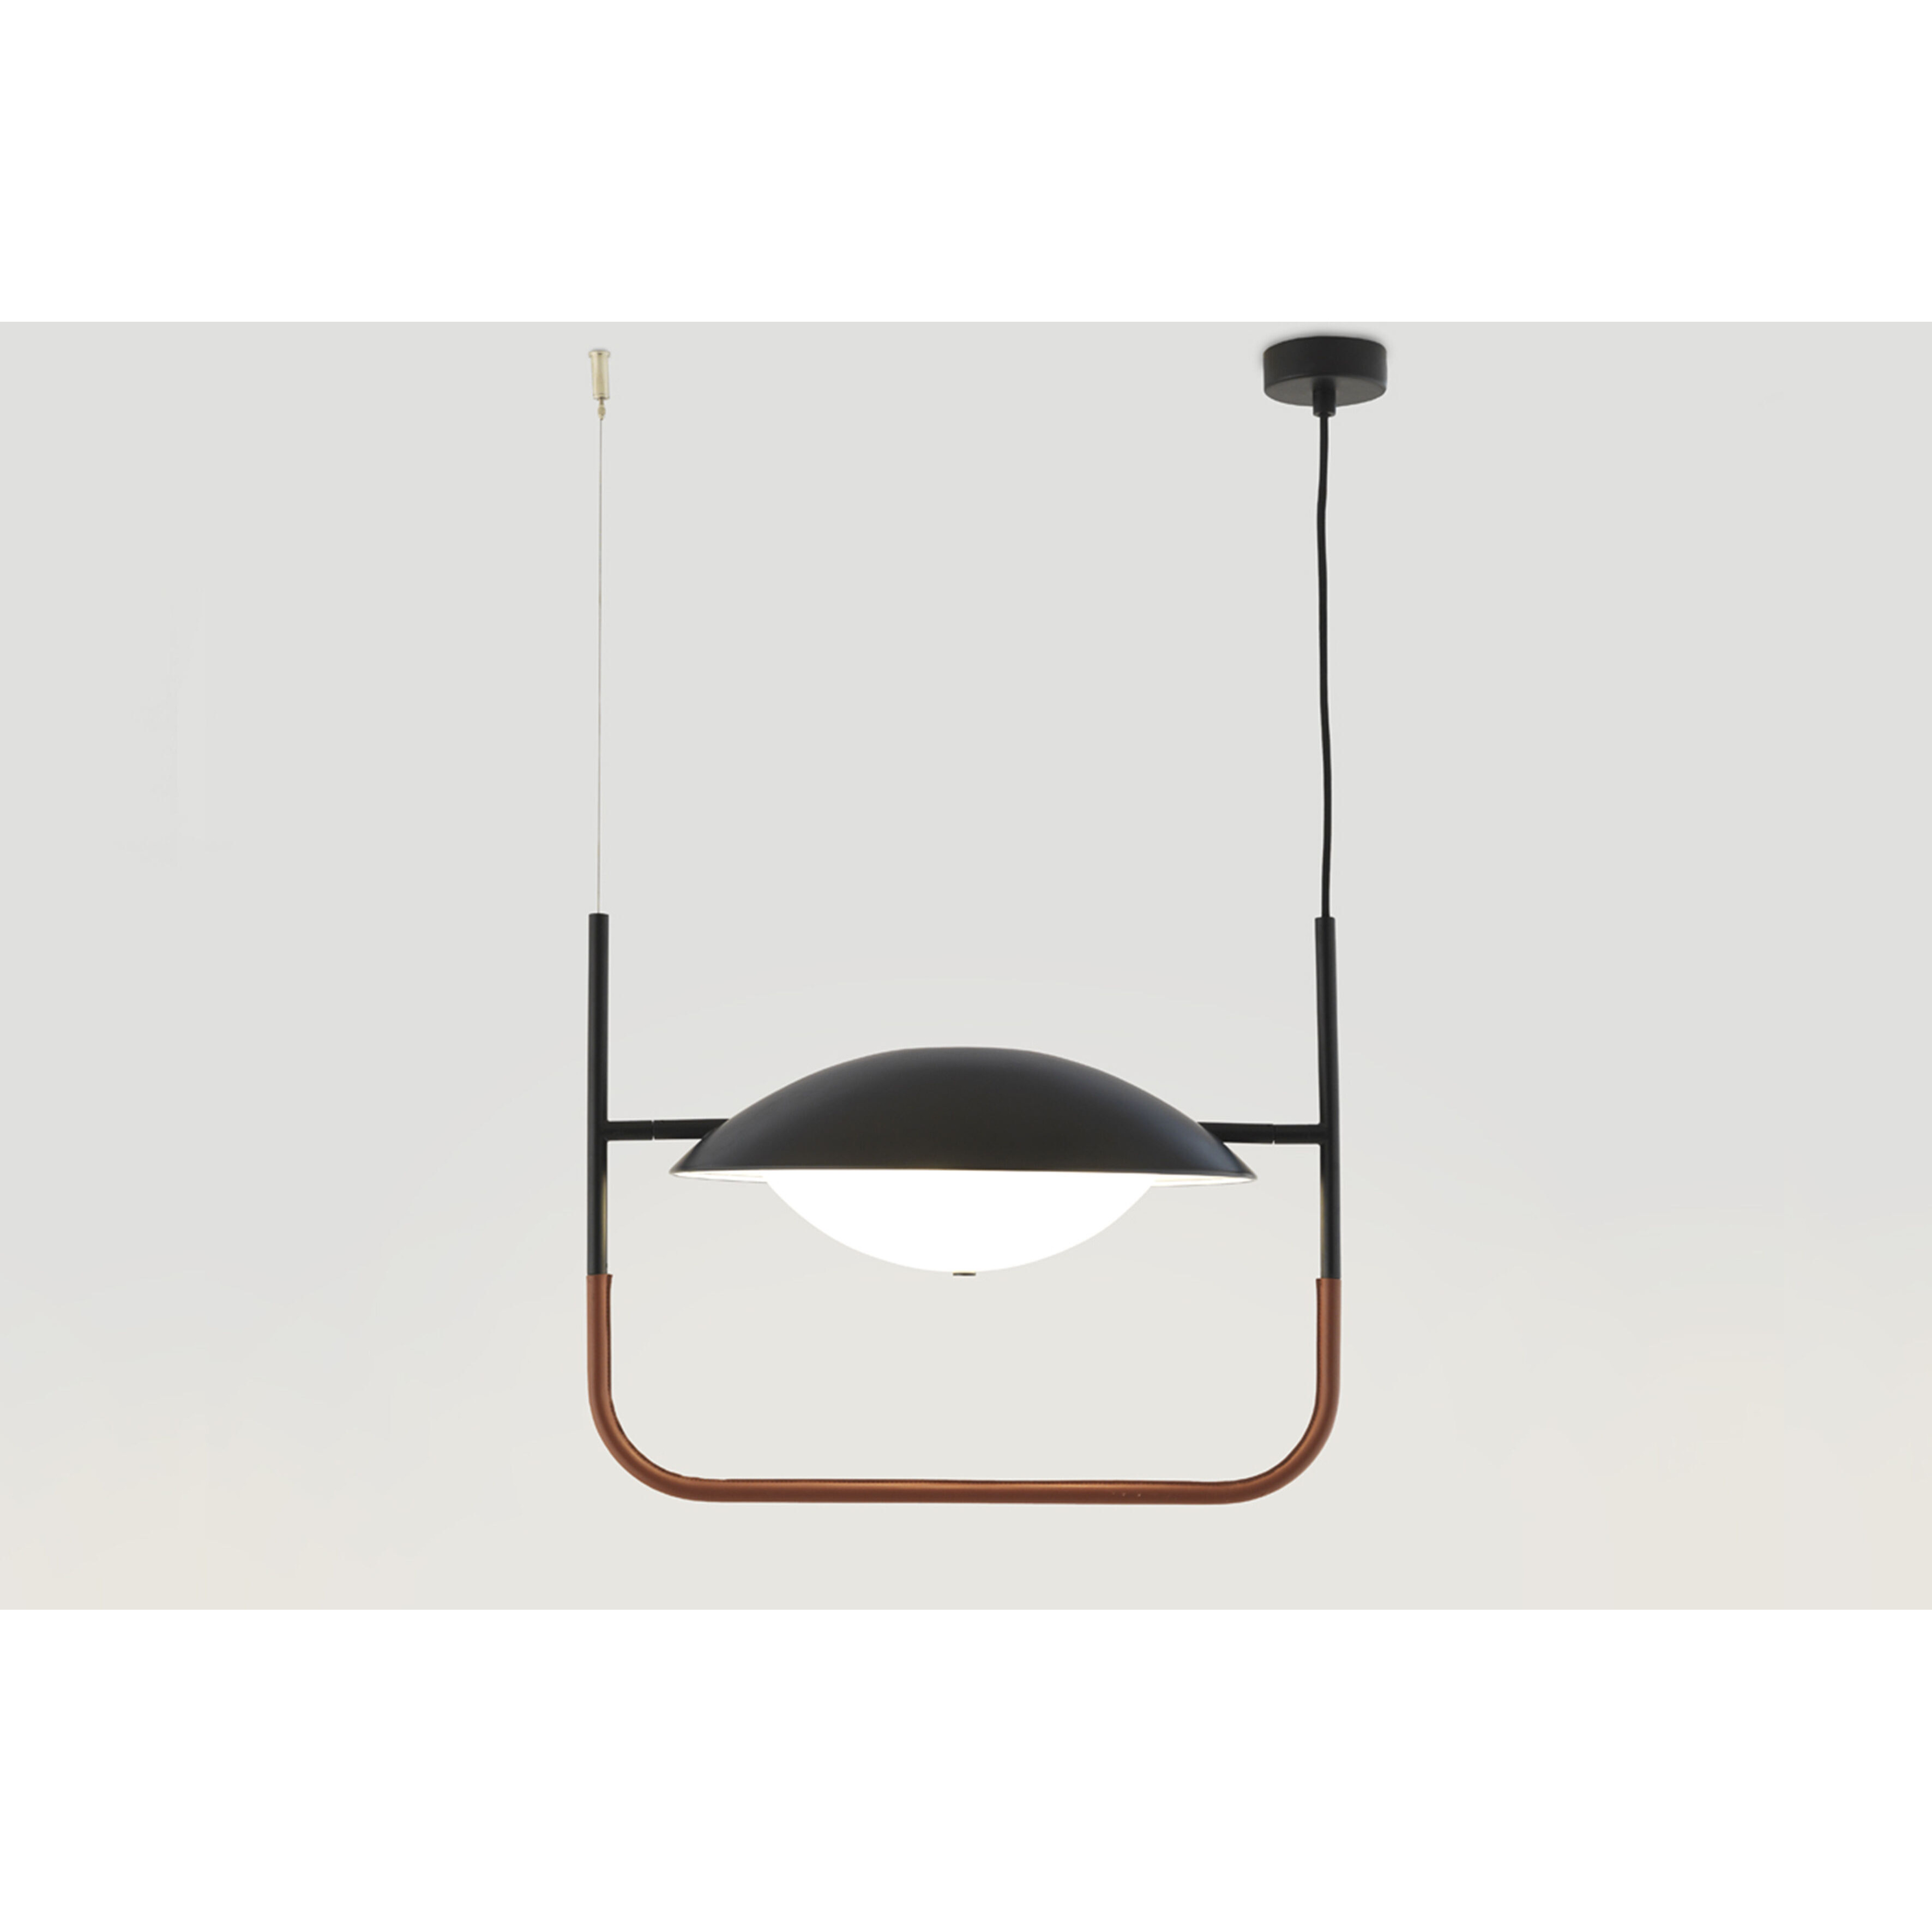 Baxter LED Pendant Lamp, Matt Black / Brown Leather Shade with Opal